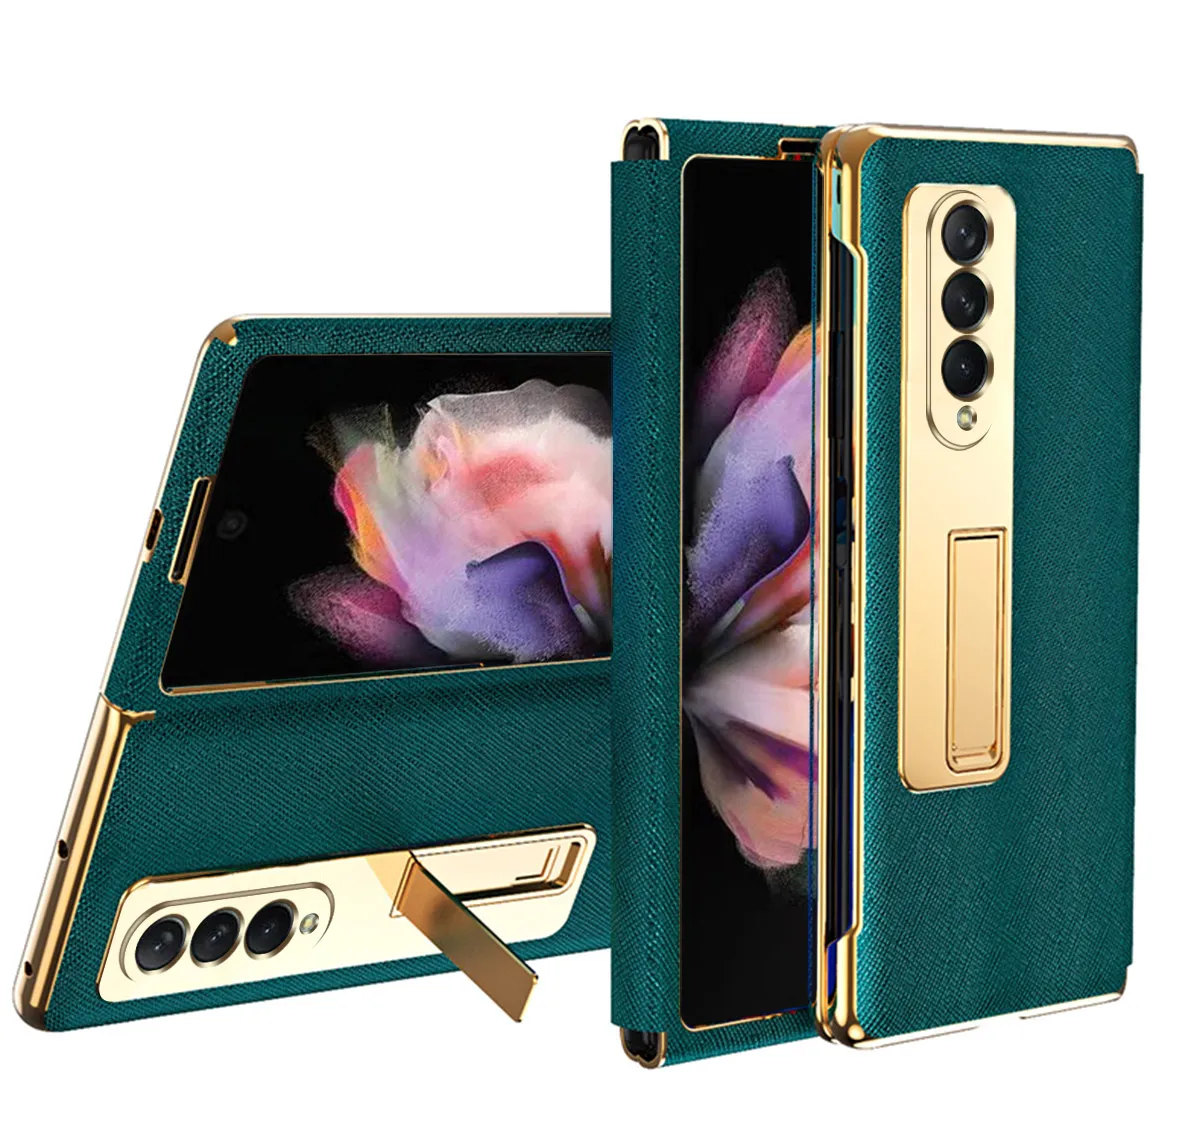 Luxury Leather Cases Plating Frame with Foldable Kickstand Front Cover Glass Screen Protector Film For Samsung Galaxy Z Fold 3 5G